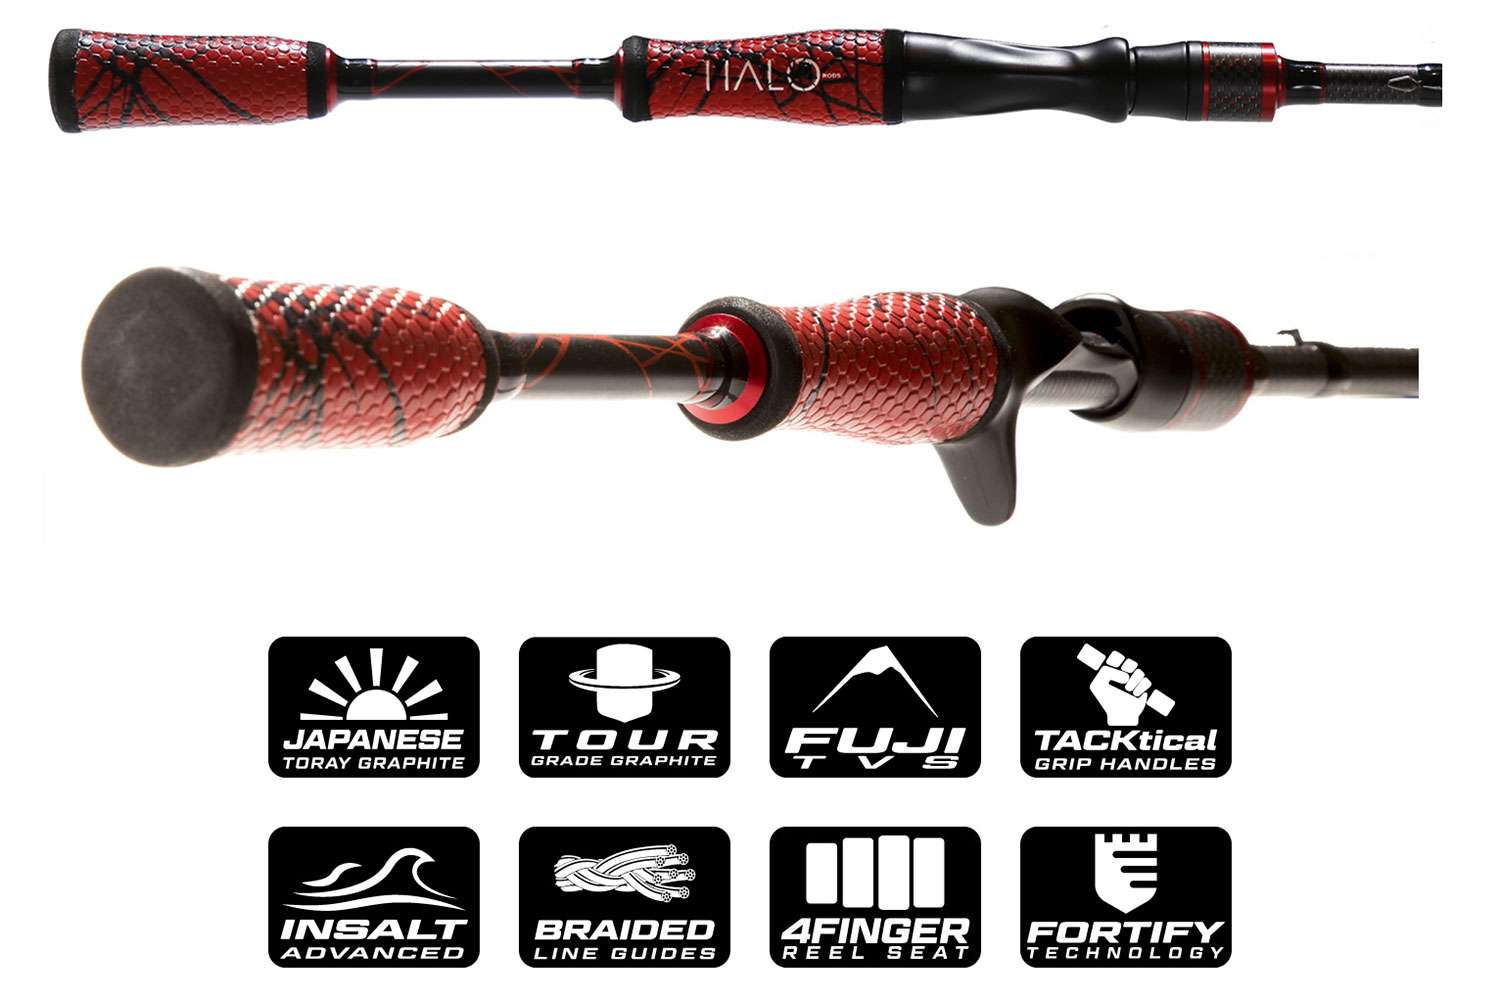 <p><b>Halo Fishing - Black Widow</b></p>
The Black Widow Bass Series is based on a quality performance Japanese graphite blank. The Black Widow is extremely lightweight and powerful with a unique taper for ultimate sensitivity and responsiveness. Tangle-free gunsmoke stainless guides with SIC inserts deliver extreme durability, and also unreal casting performance. Each rod also features the exclusive 4Finger reel seats for reduced weight and improved comfort. The custom-designed TACKtical grip handles round out the features and balances out each rod perfectly. Offering pro-driven performance for the highest levels of fishing.<br>
<p><b>MSRP: $149</b></p>
<a href=